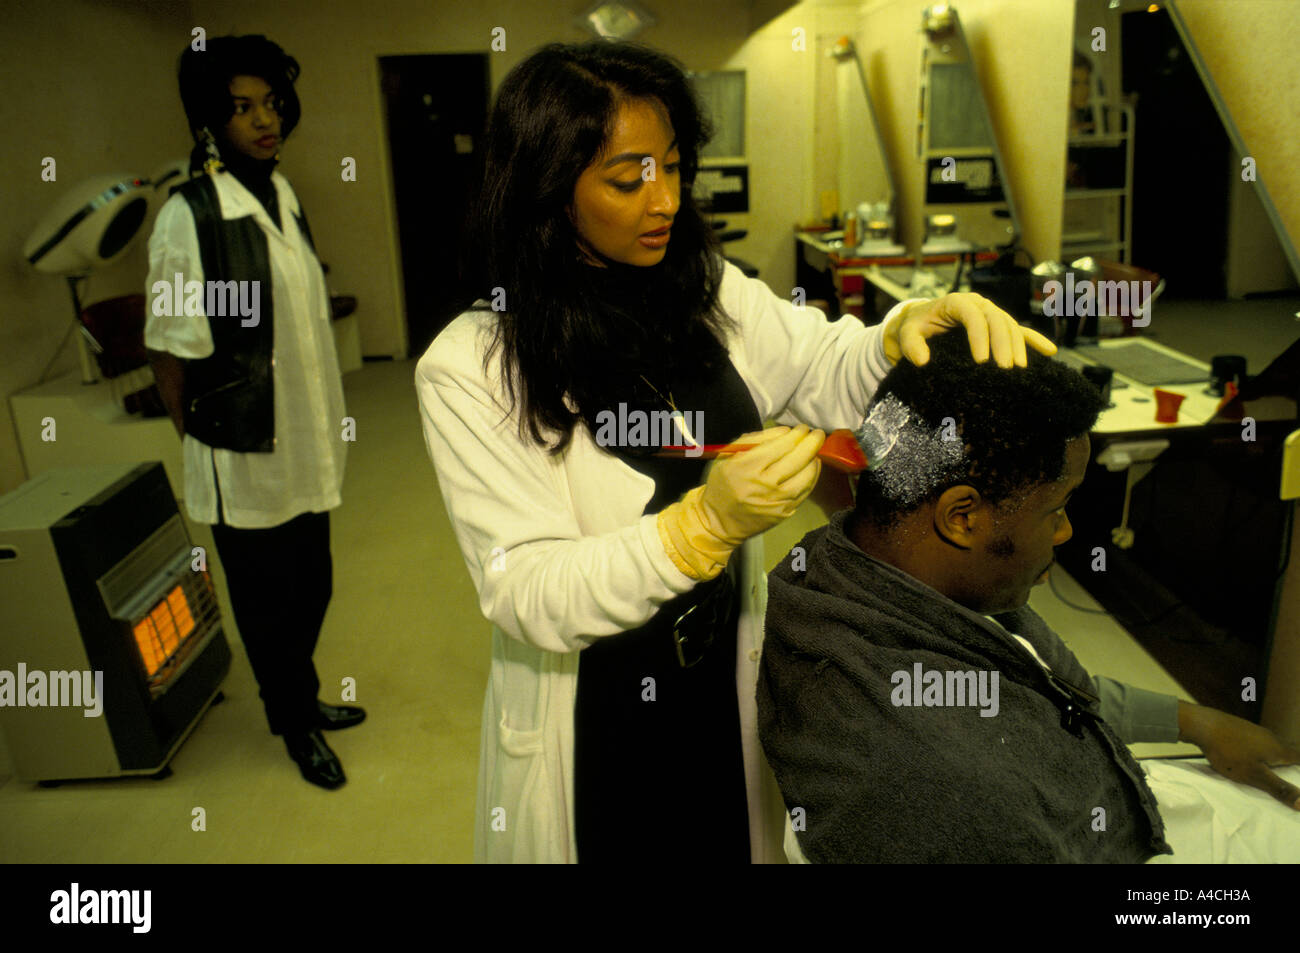 Female Hairdresser Applying Hair Product To Seated Male Client In